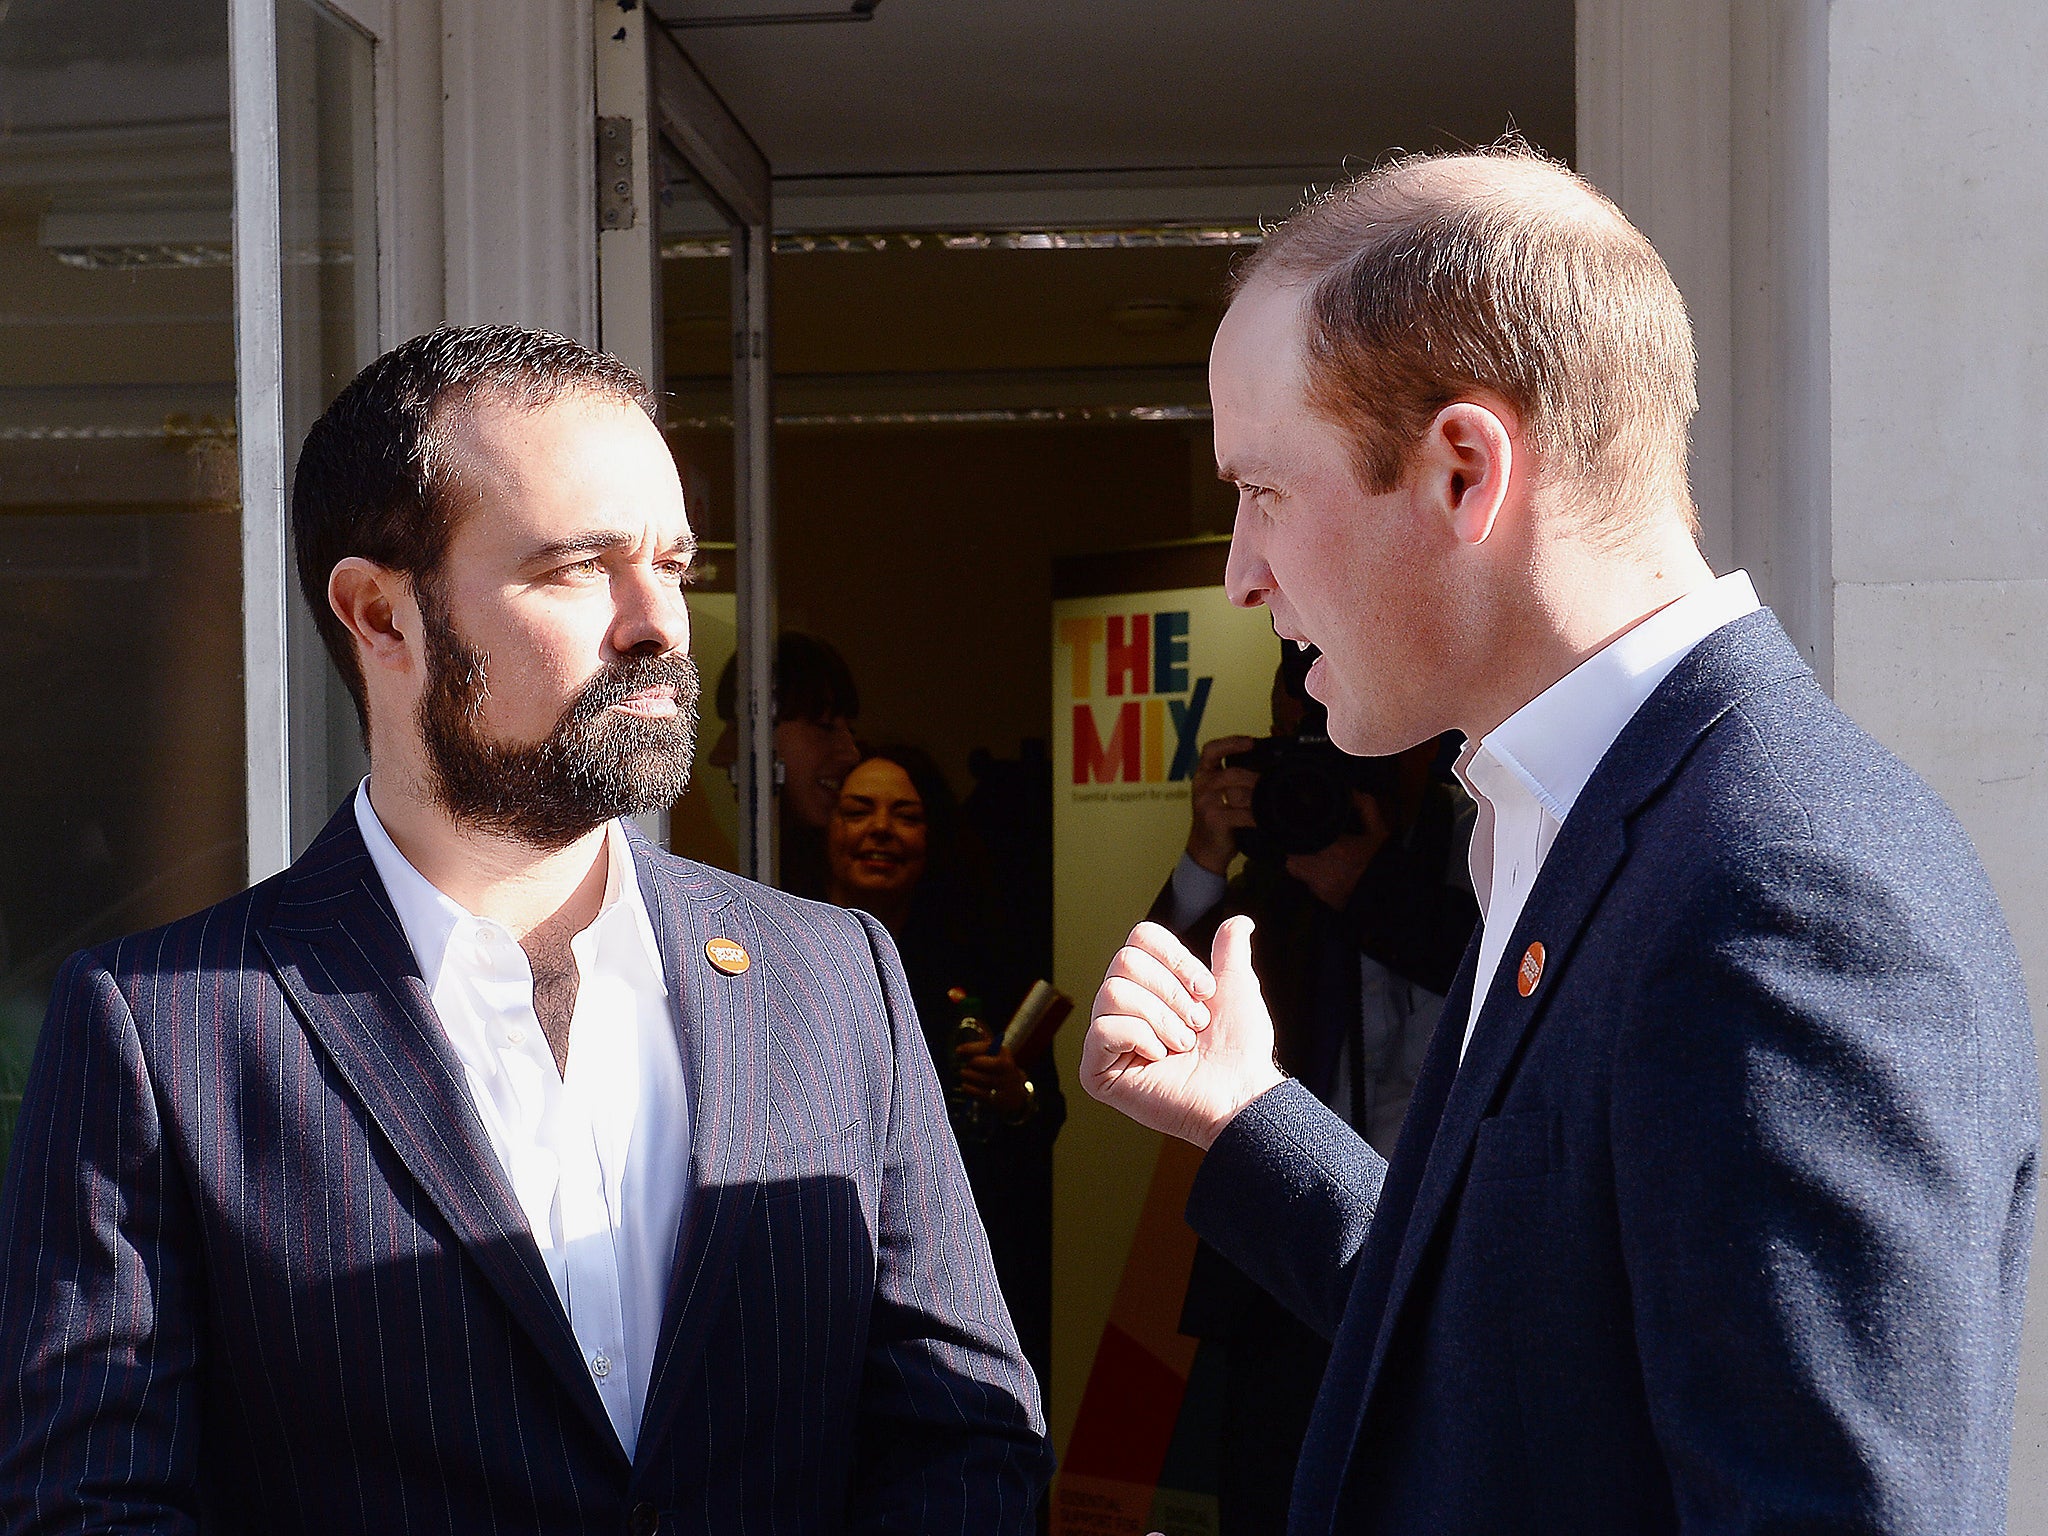 Lebedev and the Prince at the helpline launch in London today